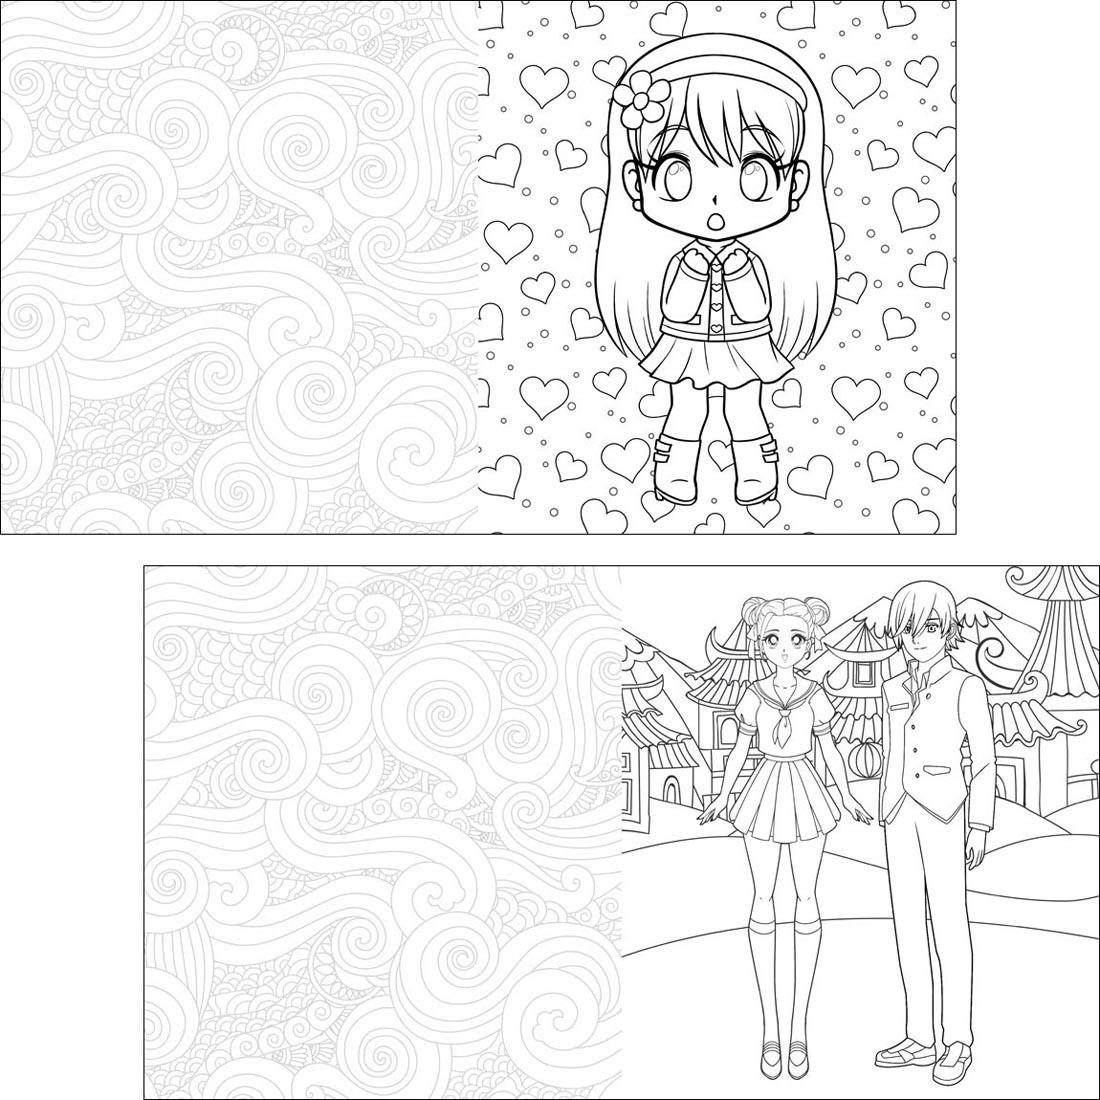 sample coloring pages from Manga & Chibis Coloring Book